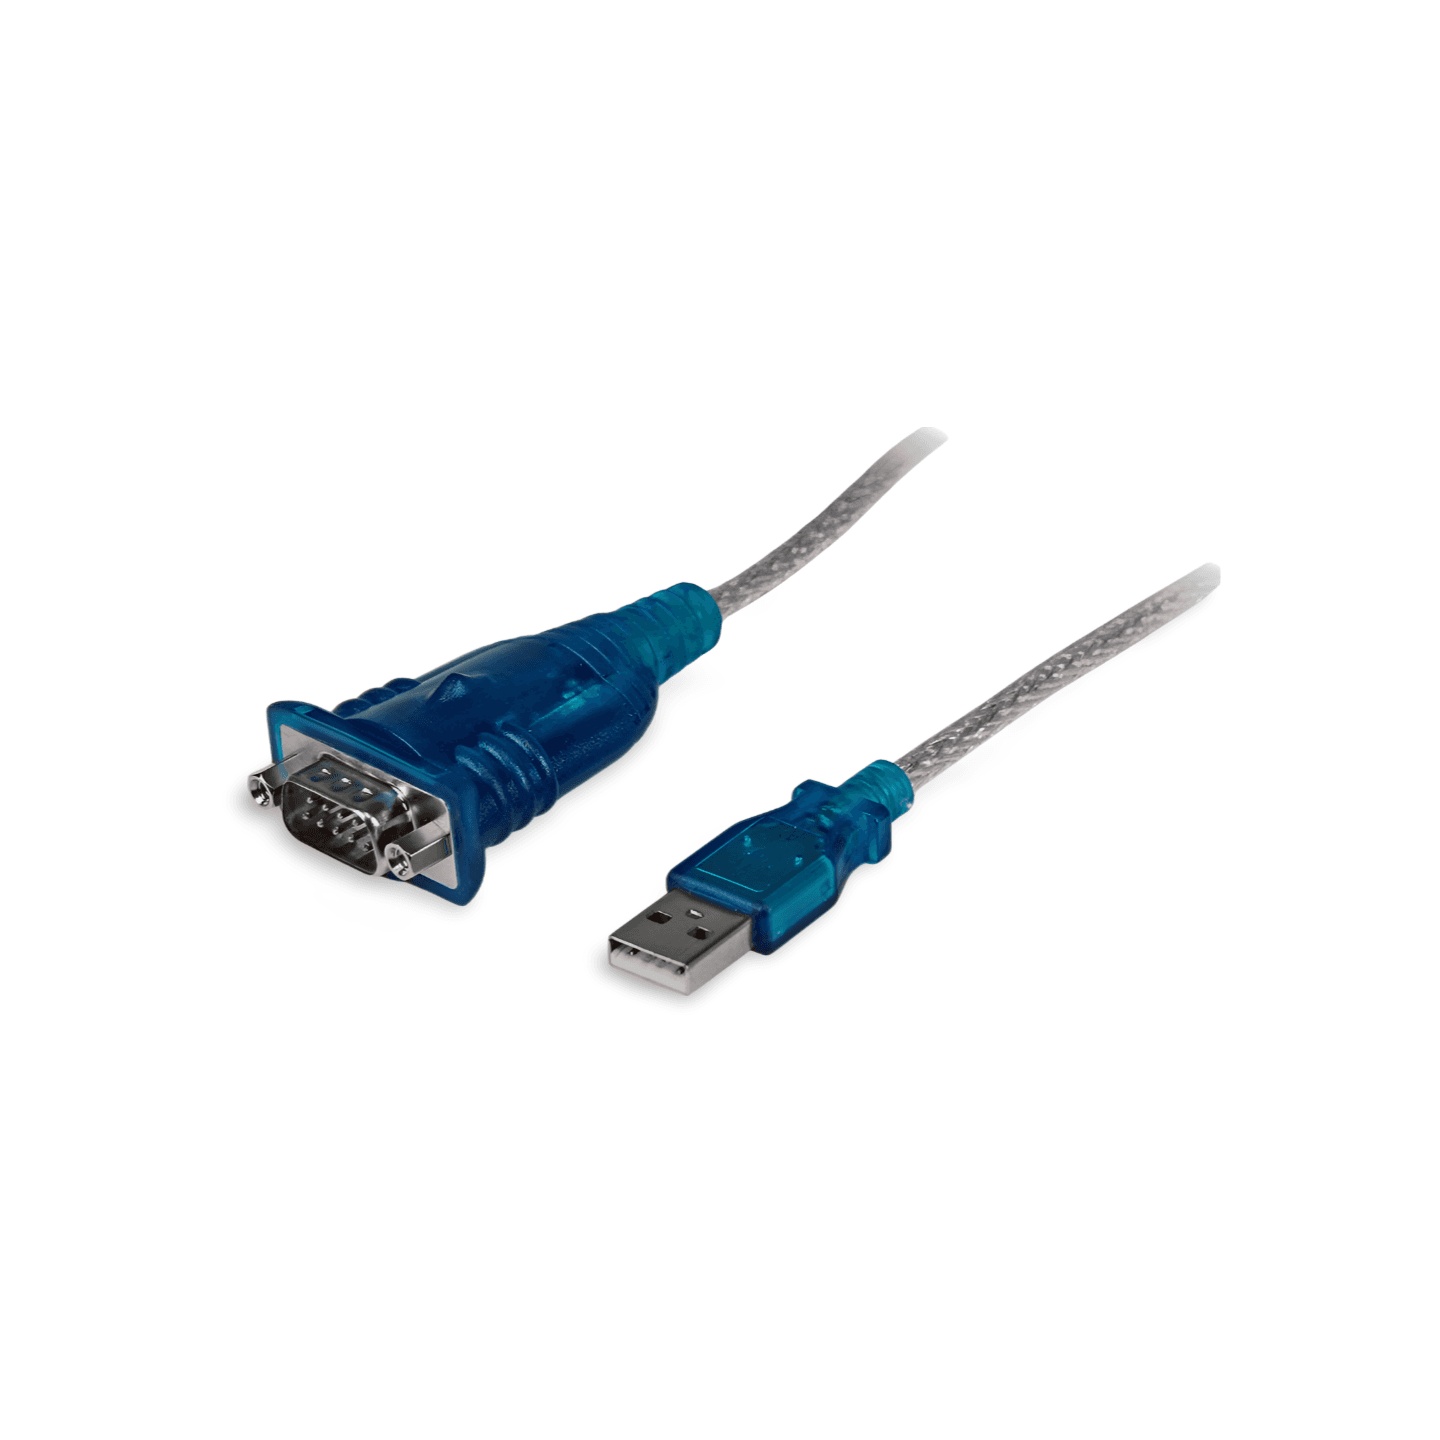 6ft USB to DB9 Male Serial Port Adapter Prolific blue